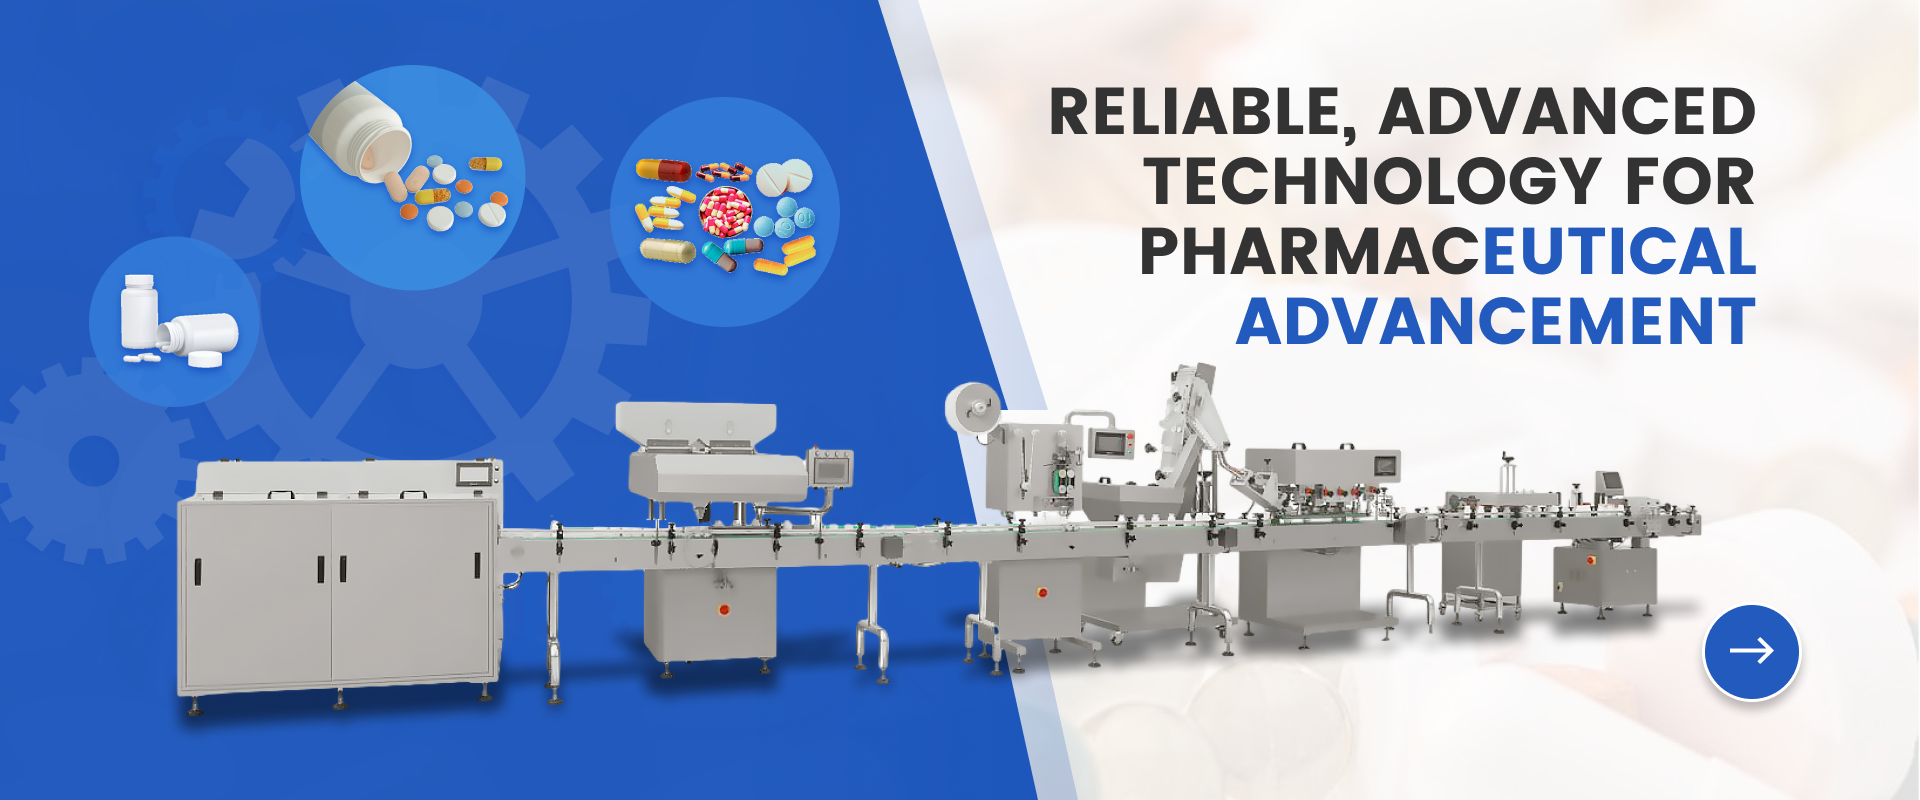 Reliable Advanced Technology for Pharmaceutical Advancement